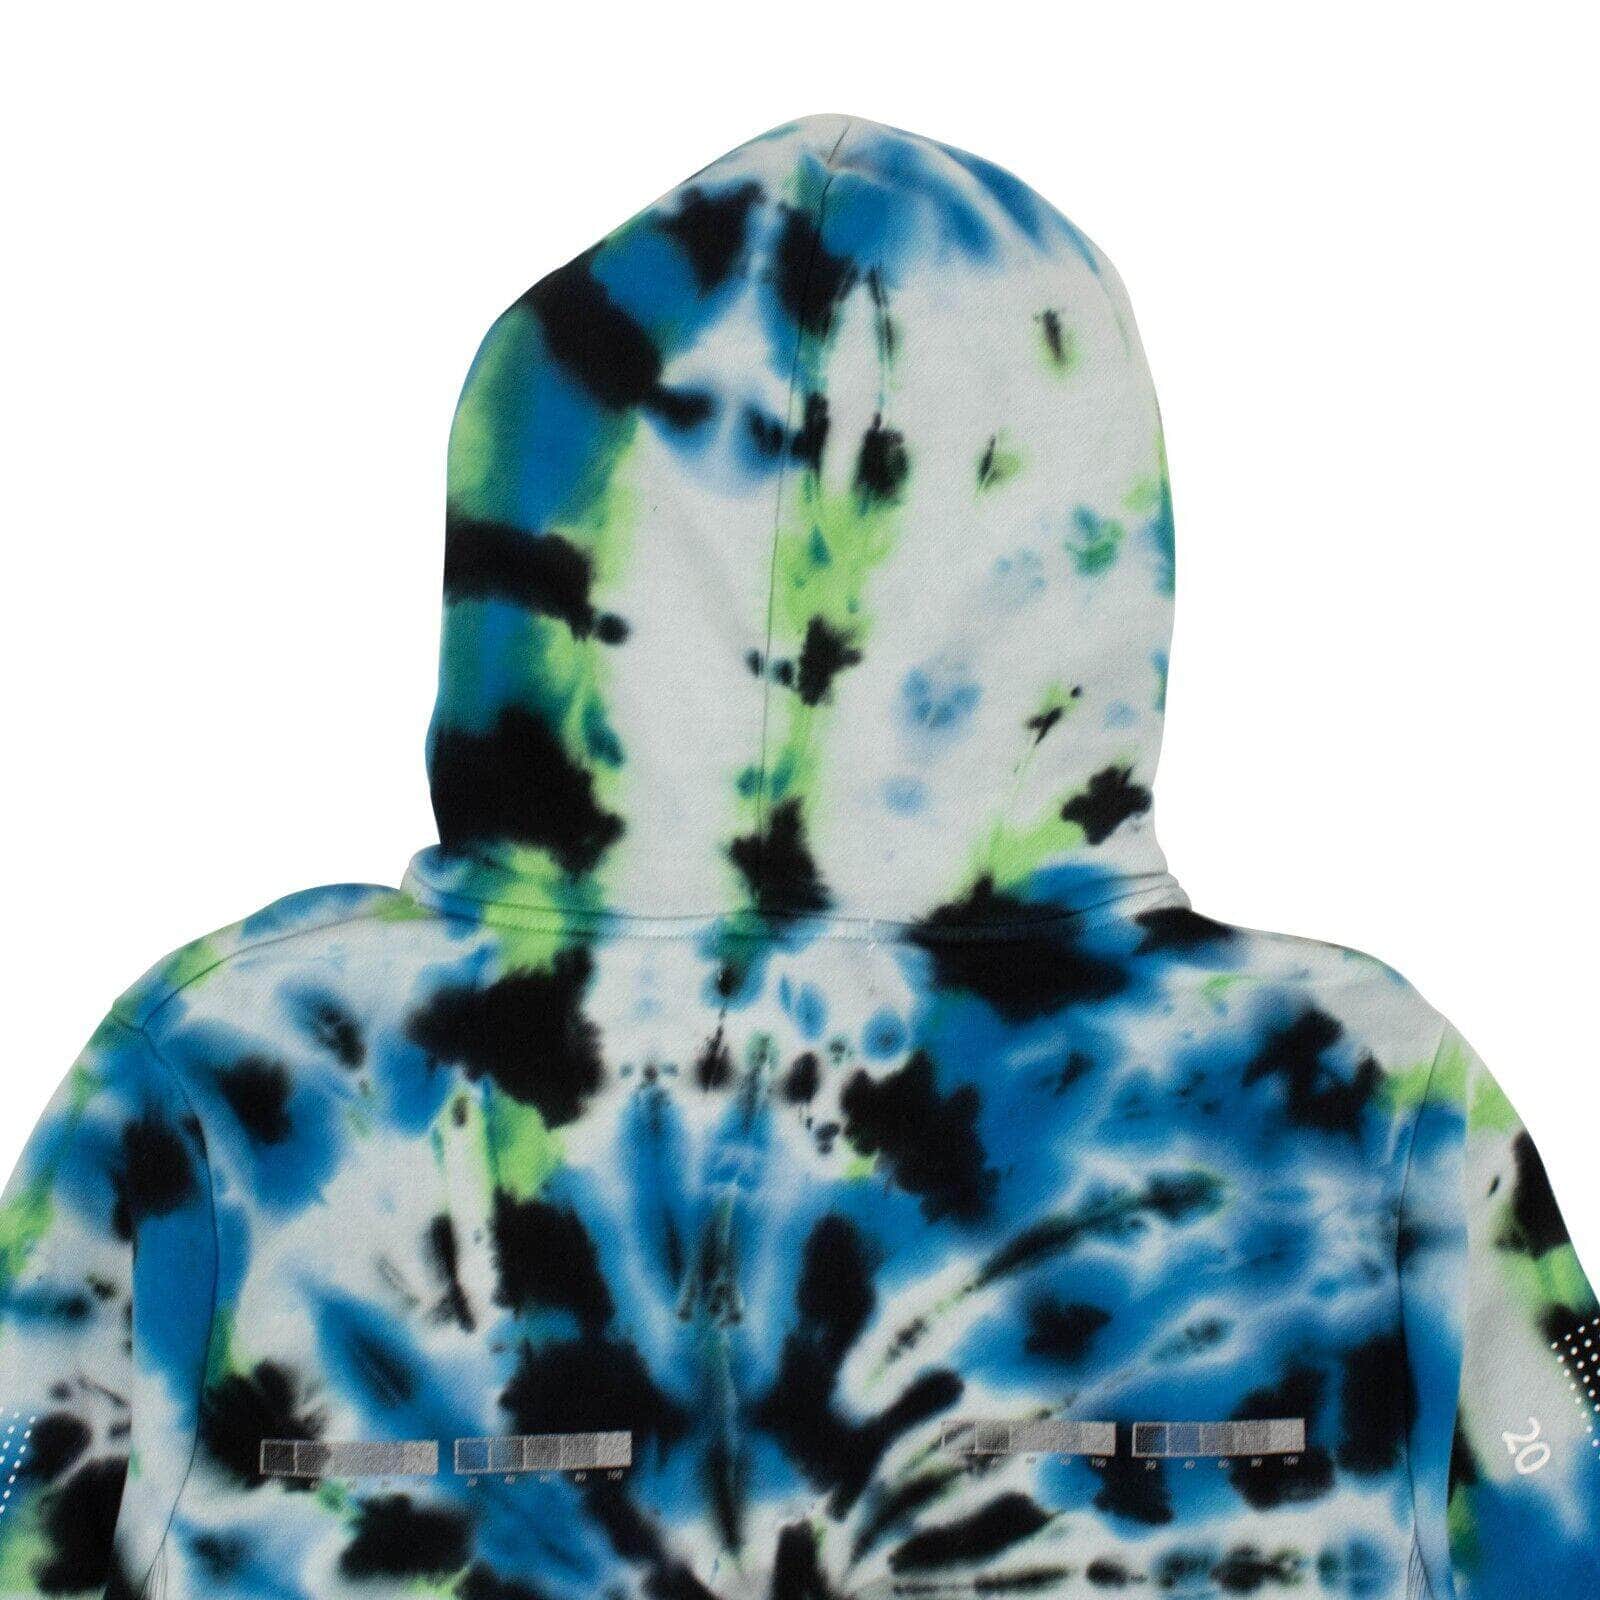 Indvlst channelenable-all, chicmi, couponcollection, gender-mens, indvlst, main-clothing, mens-shoes, MixedApparel, size-l, size-m, size-xl, size-xxl, under-250 Multi Tie Dye Test Bar Logo Hoodie